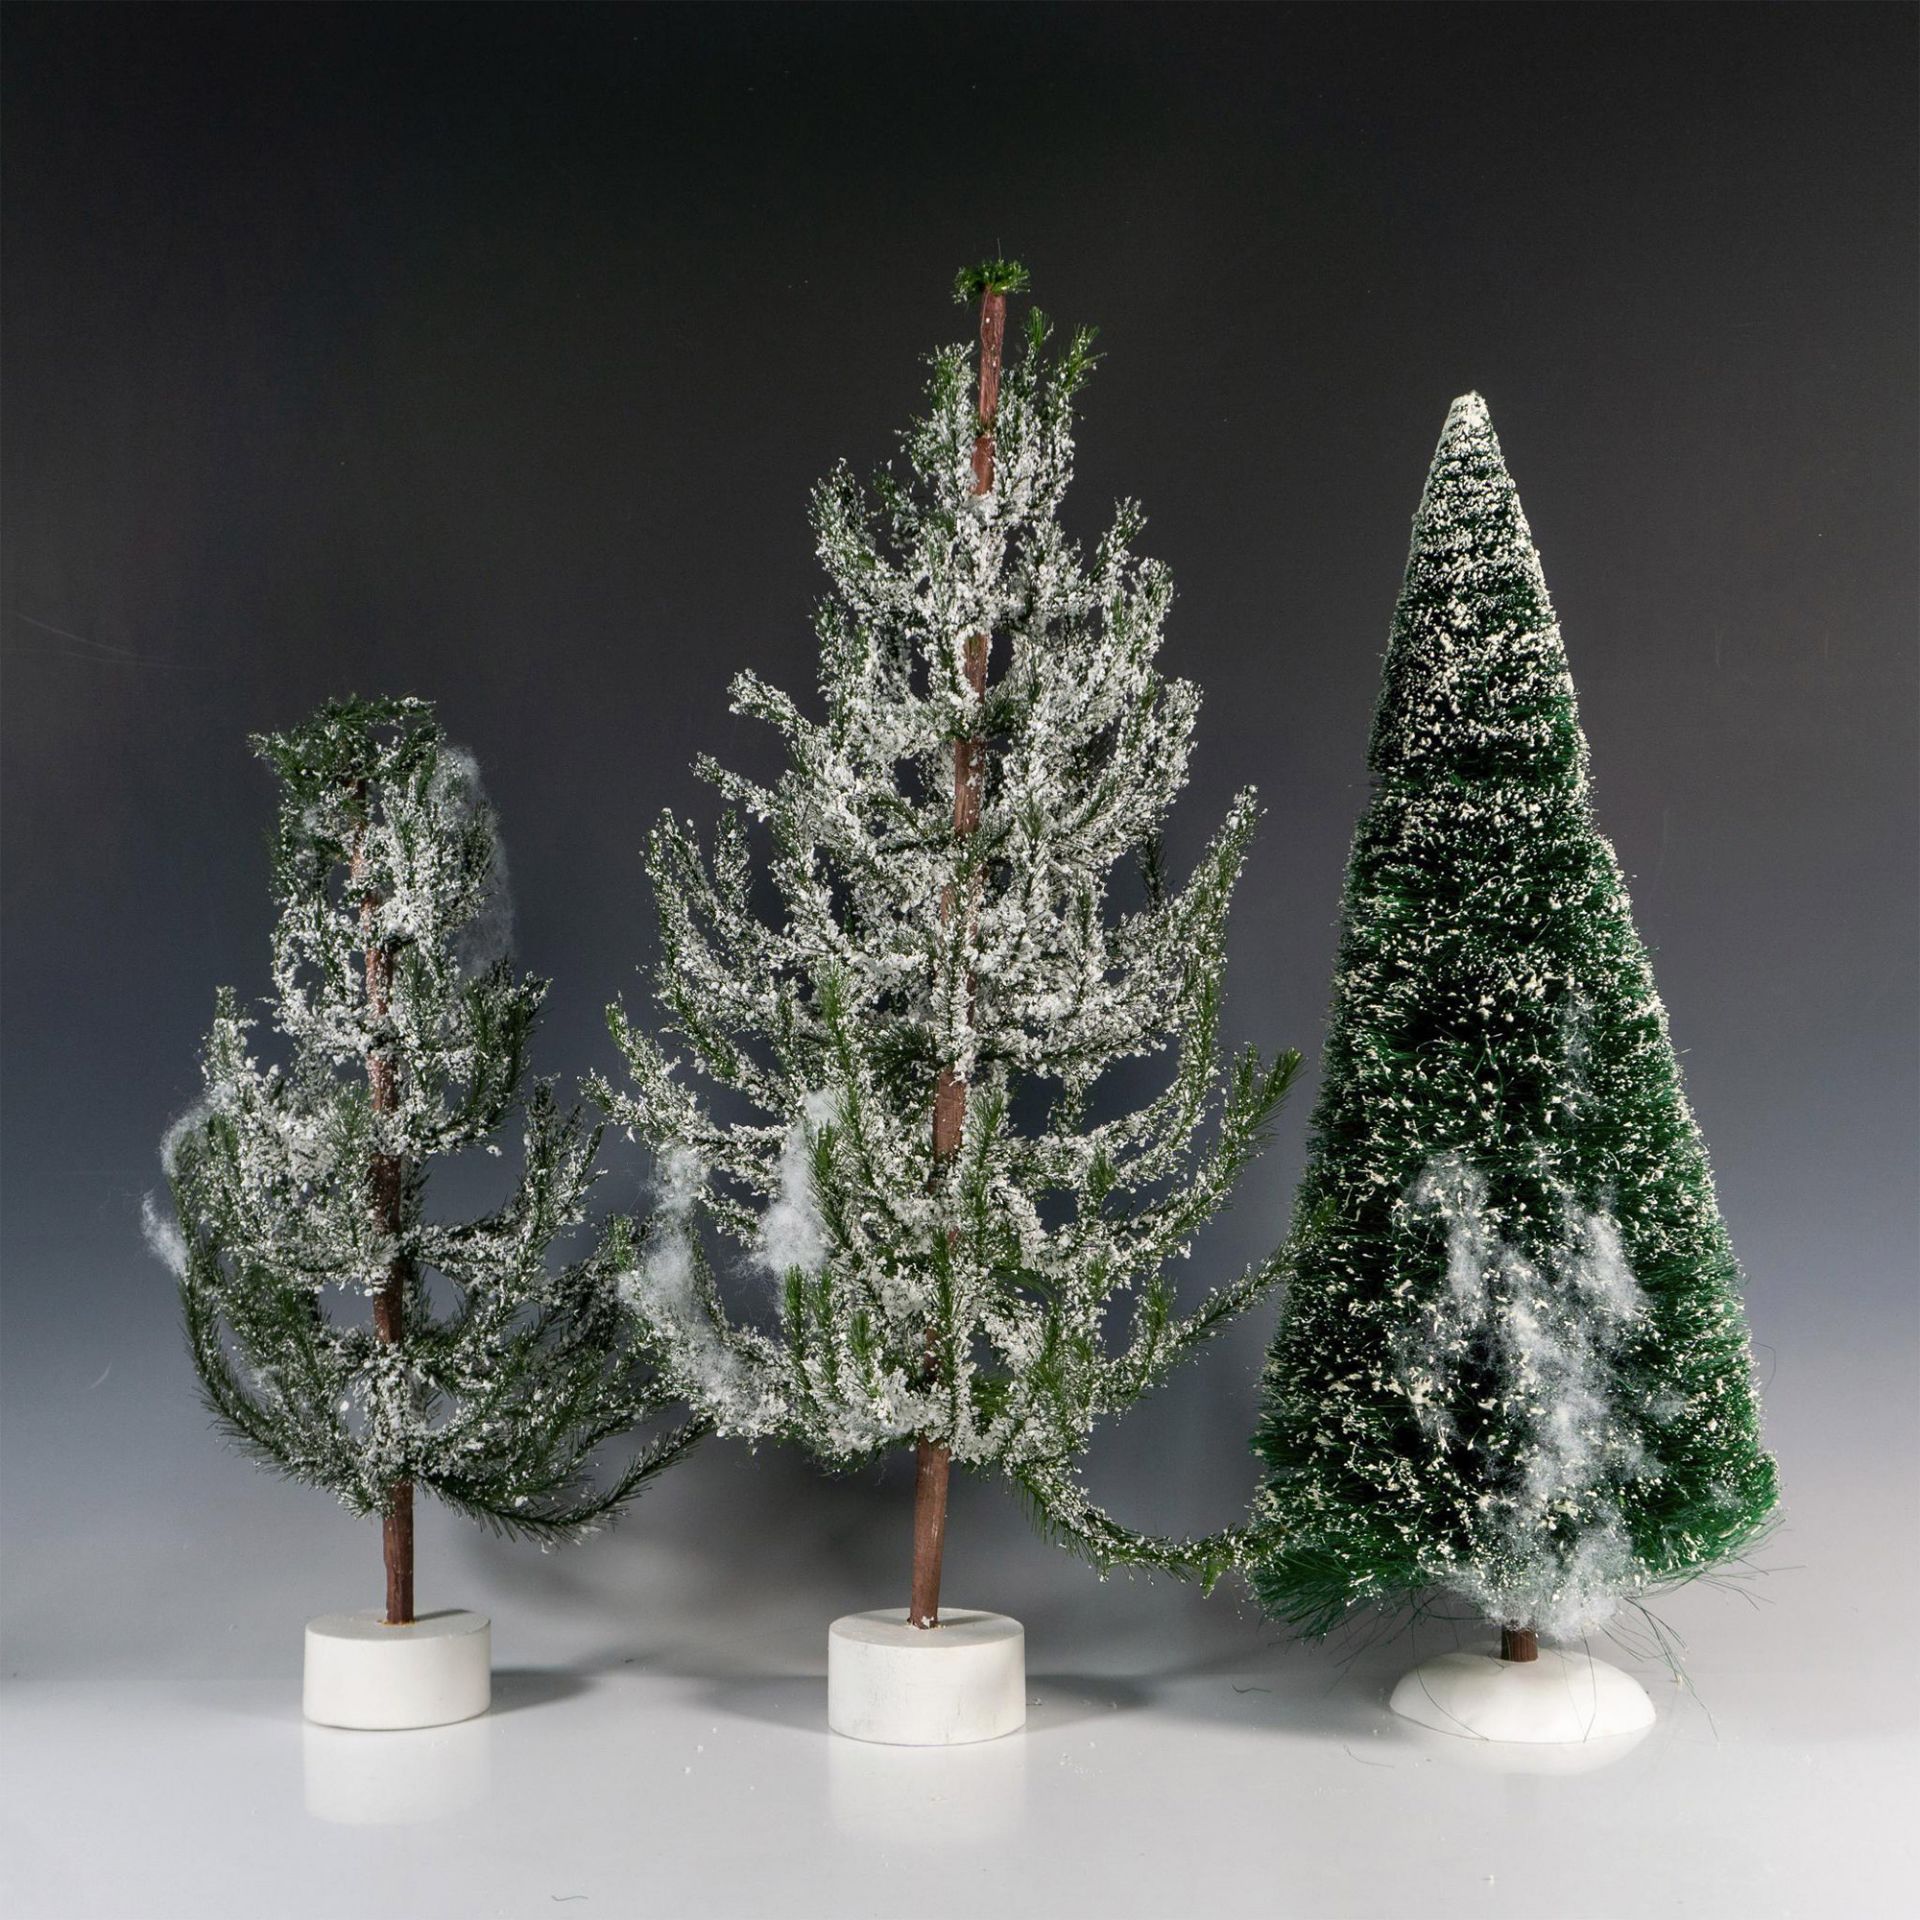 3pc Department 56 Village Accessory Trees Figurines - Image 2 of 3